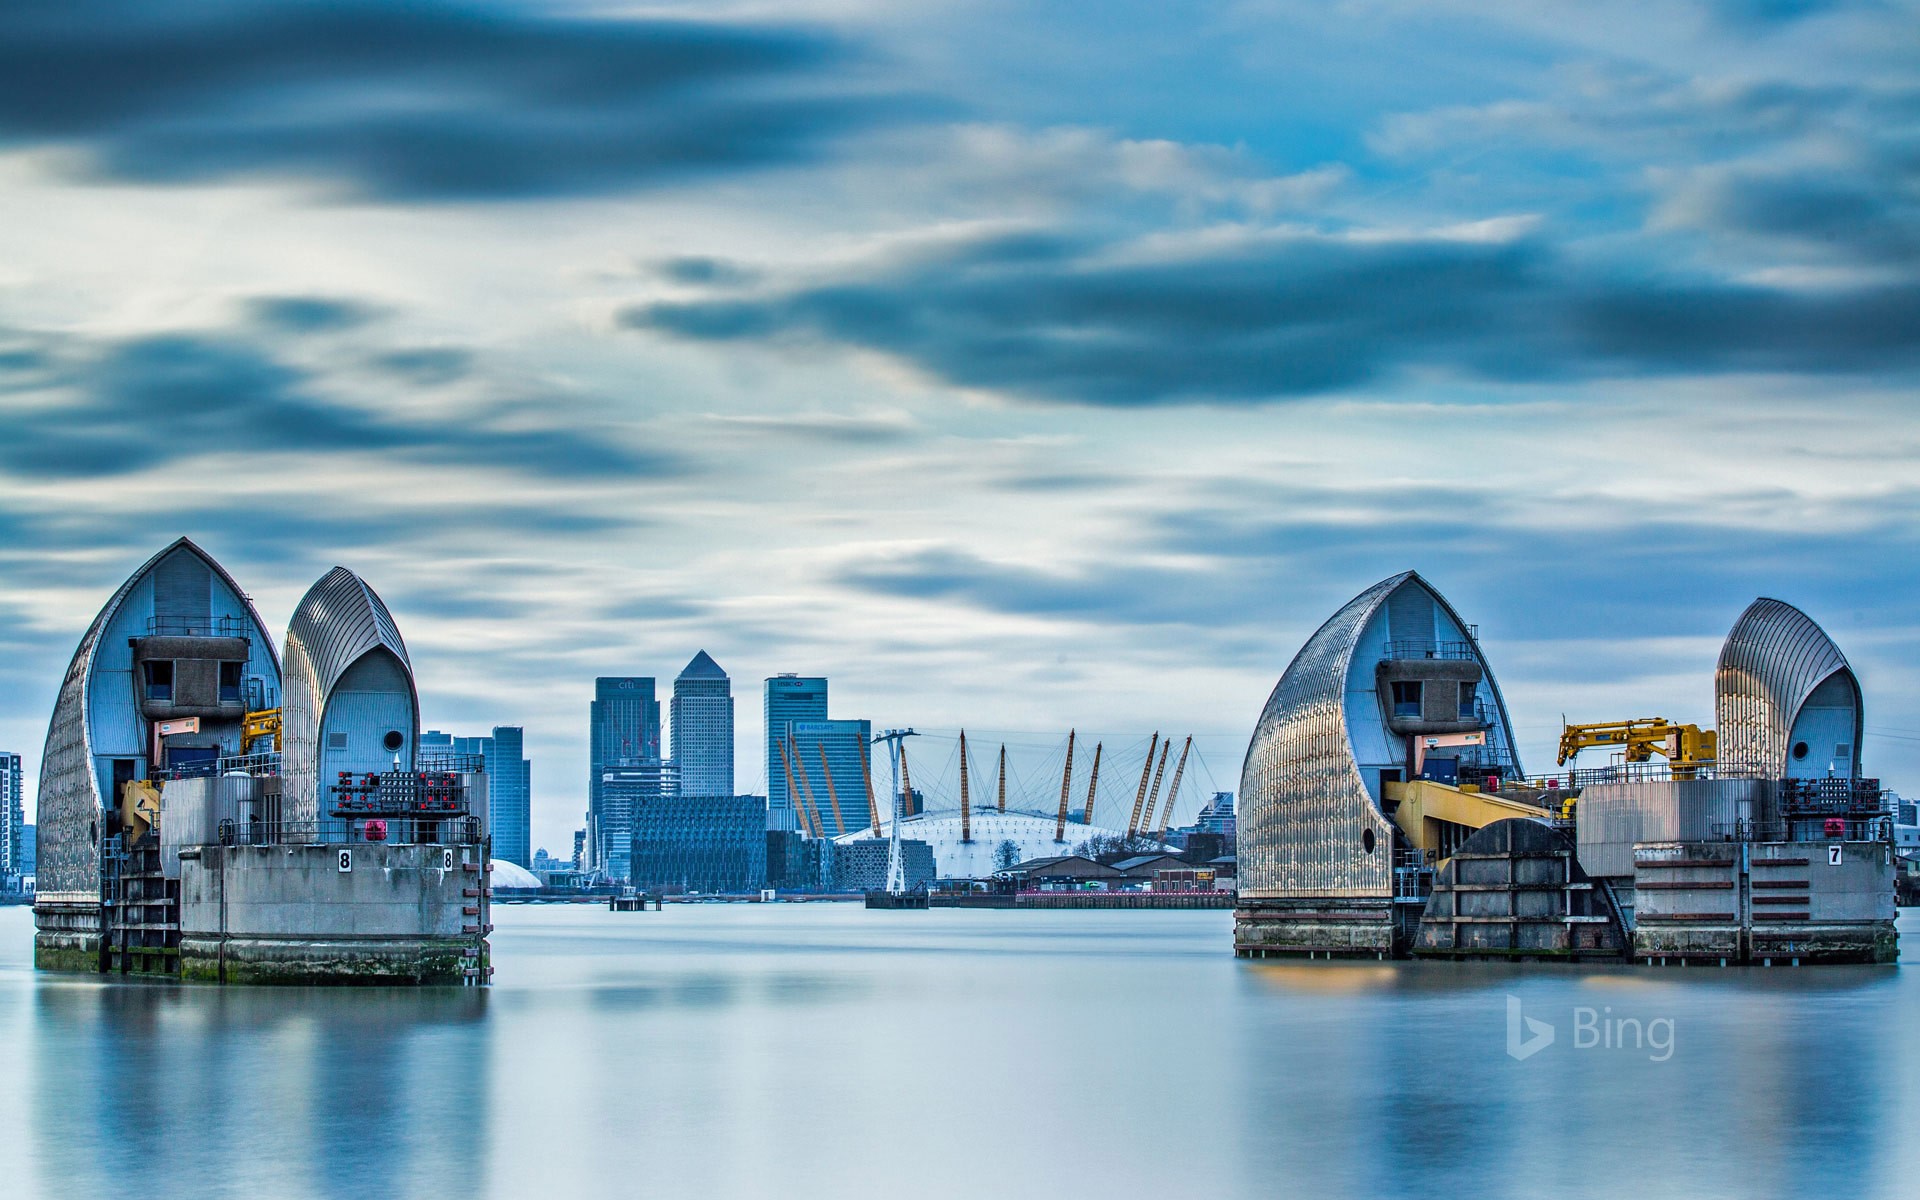 The Thames Barrier in London